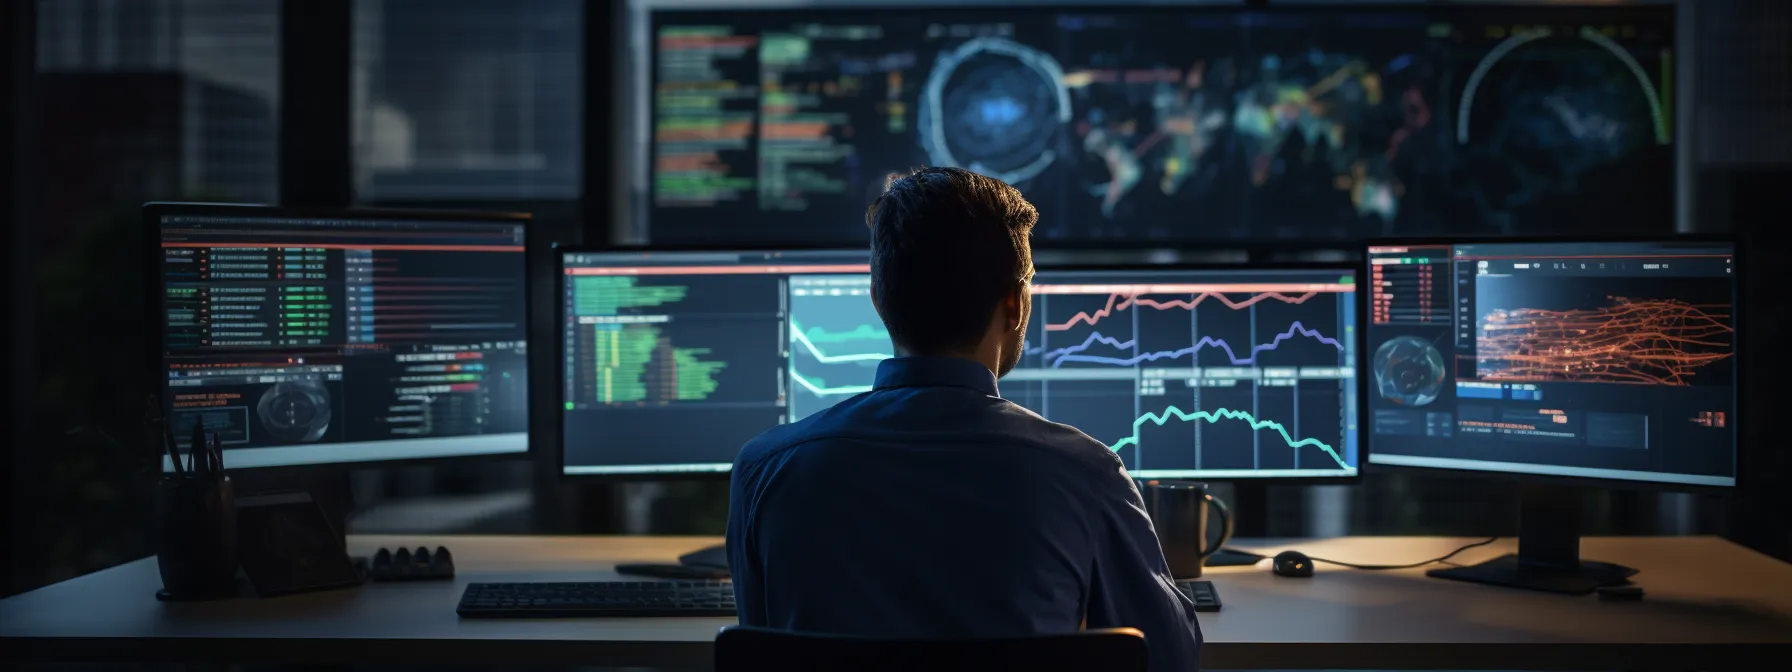 an analyst sitting in front of multiple computer monitors with seo data visualizations and graphs displaying on screens.